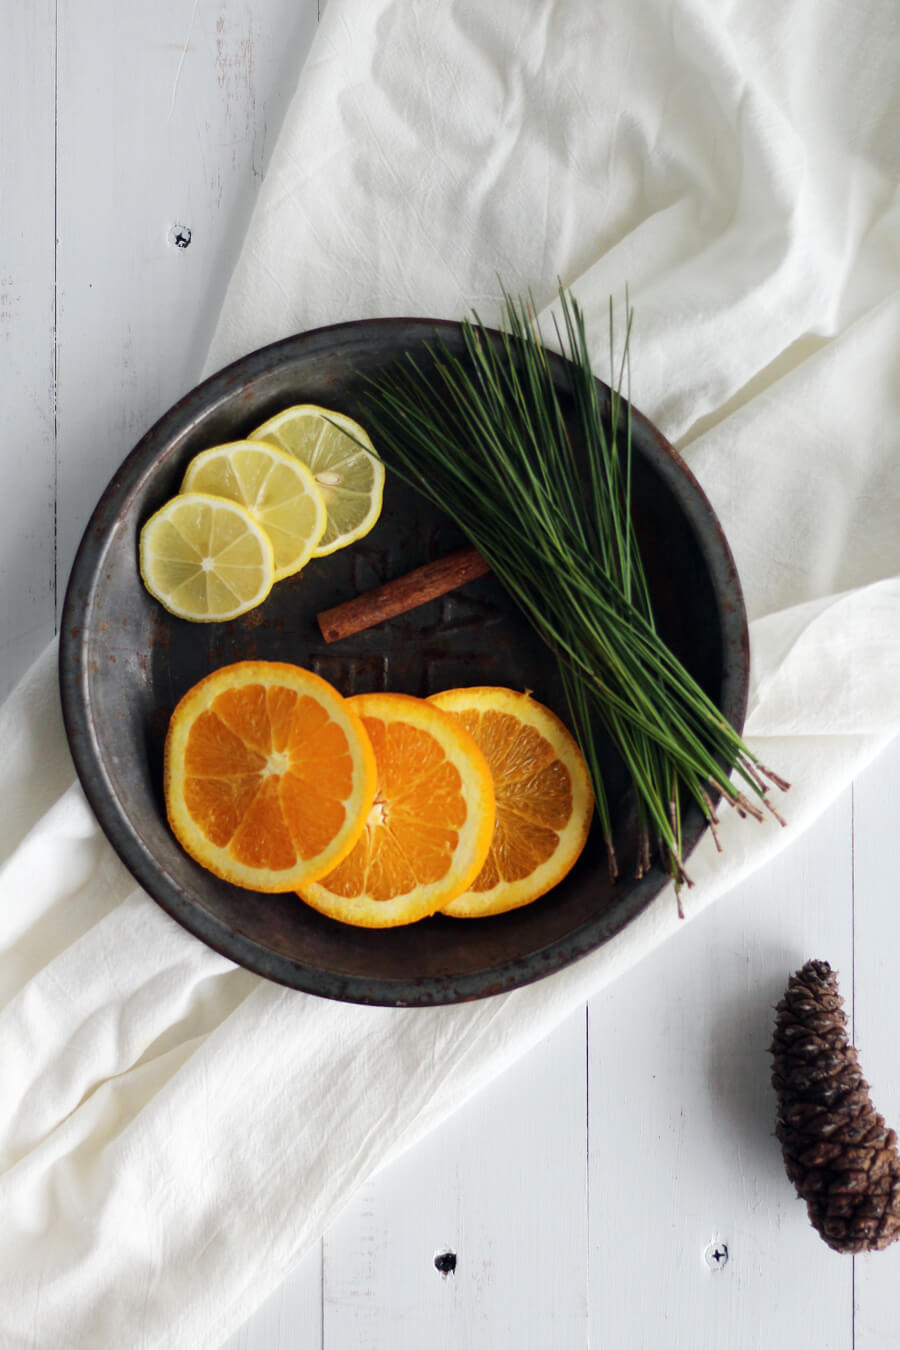 Make Christmas magic happen in your home with a few natural fruits, plants, and spices. In this post, we have 6 simple scents for homemade air fresheners that you can simmer on your stove top.